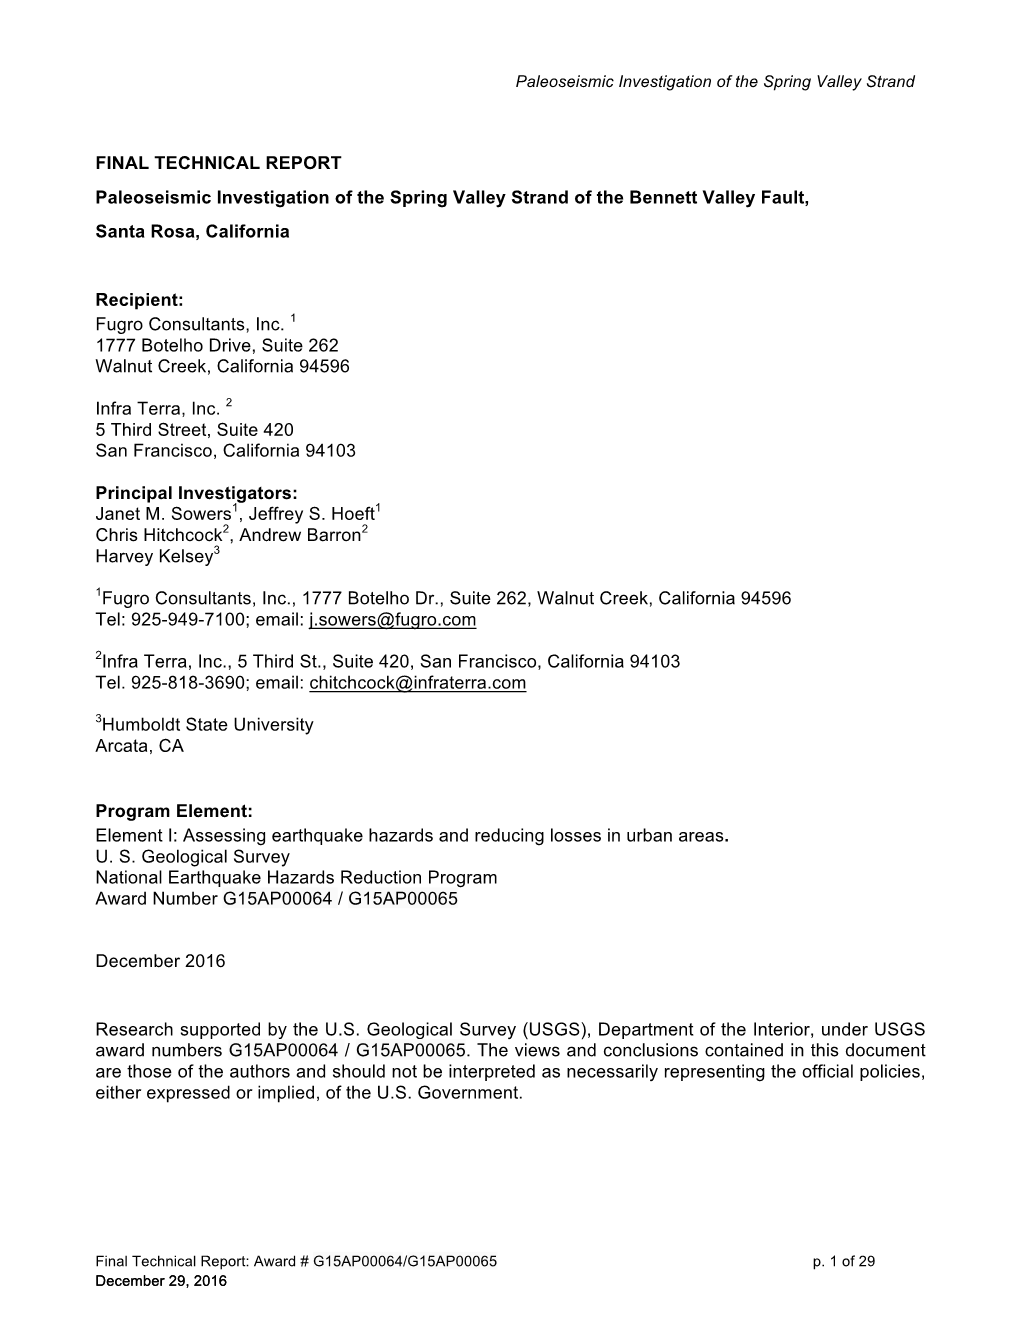 FINAL TECHNICAL REPORT Paleoseismic Investigation of the Spring Valley Strand of the Bennett Valley Fault, Santa Rosa, California